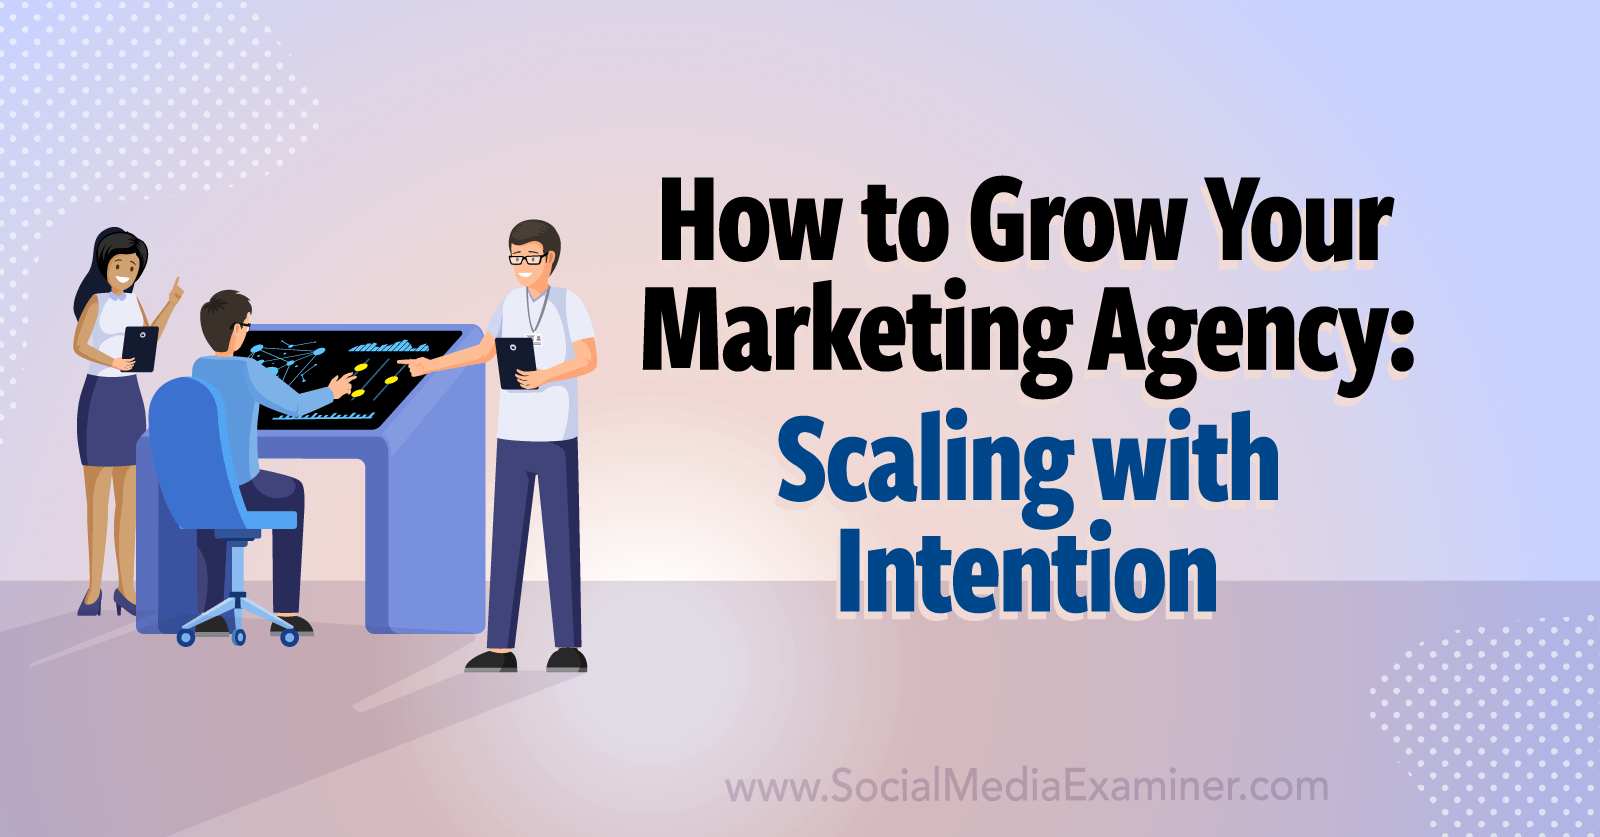 how-to-grow-your-marketing-agency-scaling-with-intention-social-media-examiner